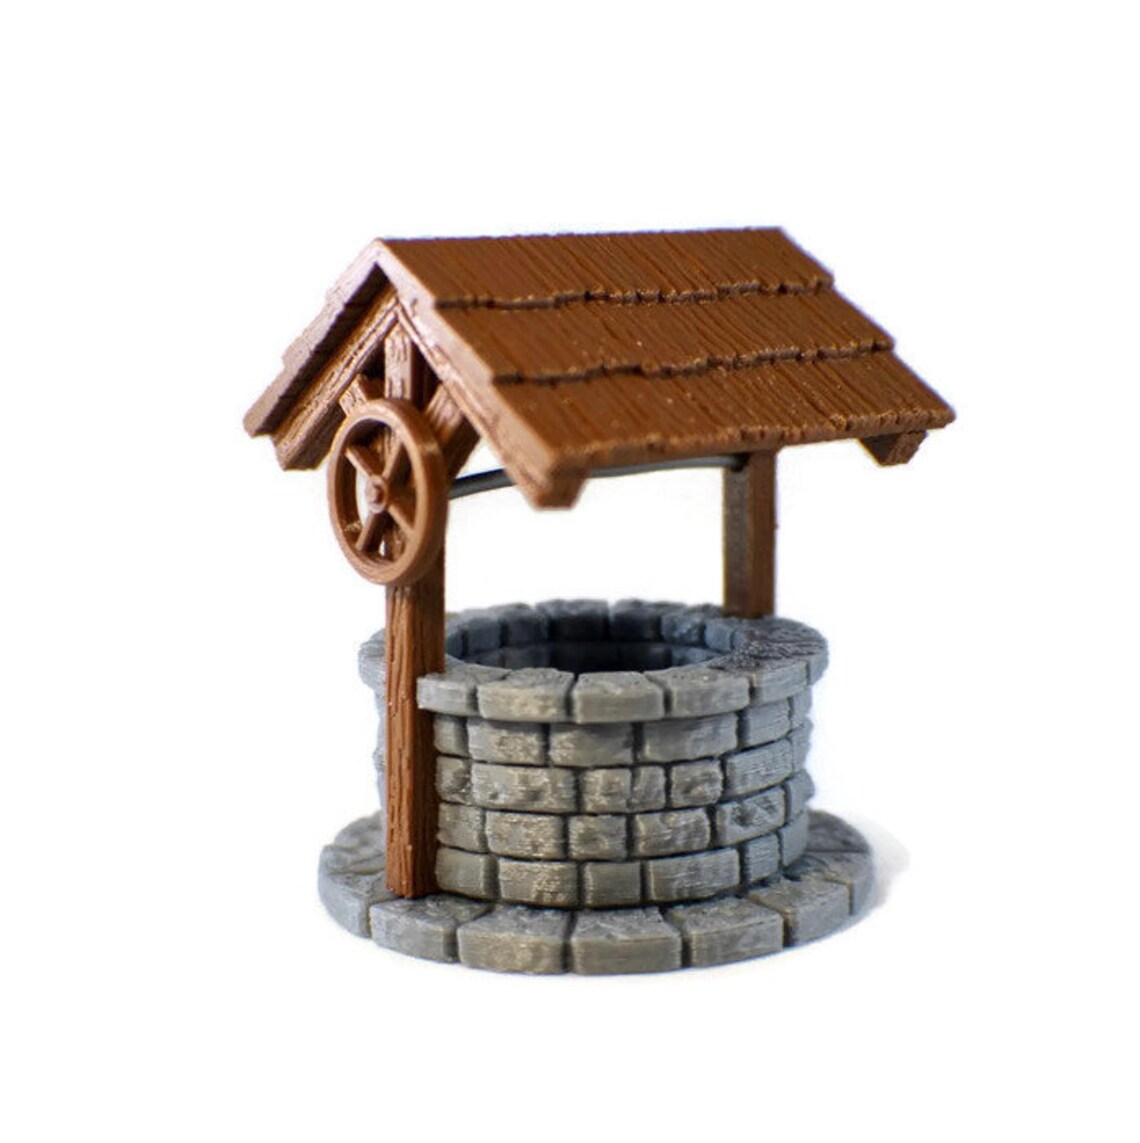 28mm Scale Village Well for Tabletop RPG Dungeon Terrain | Etsy